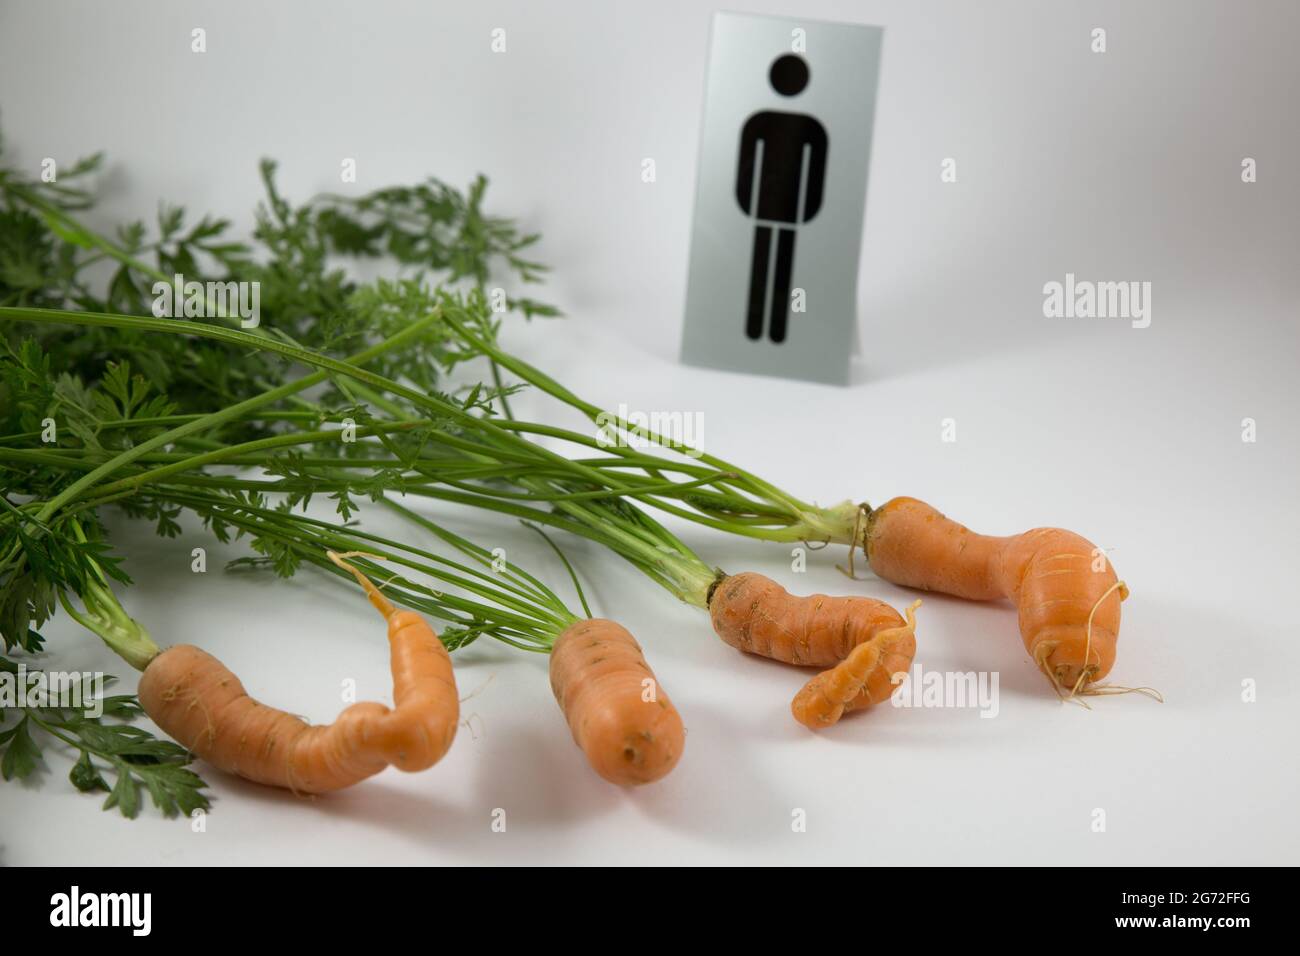 Isolated rude carrots with a 'male' sign on a white background Stock Photo